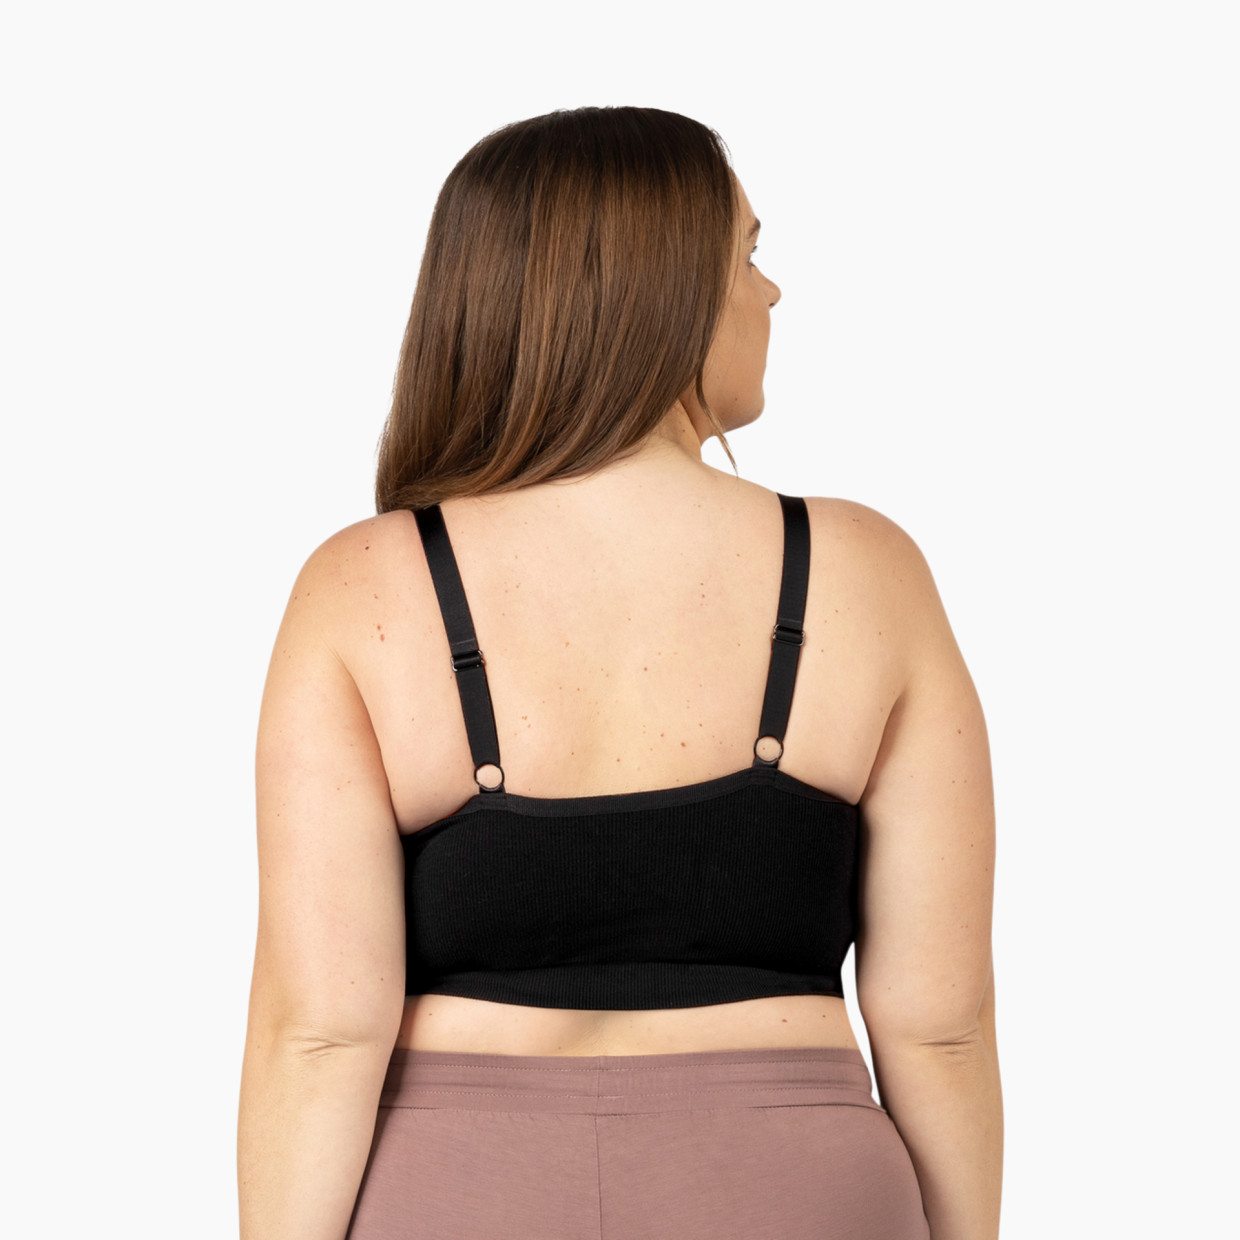 Kindred Bravely Sublime Bamboo Hands-Free Pumping Lounge & Sleep Bra - Black, Small-Busty.